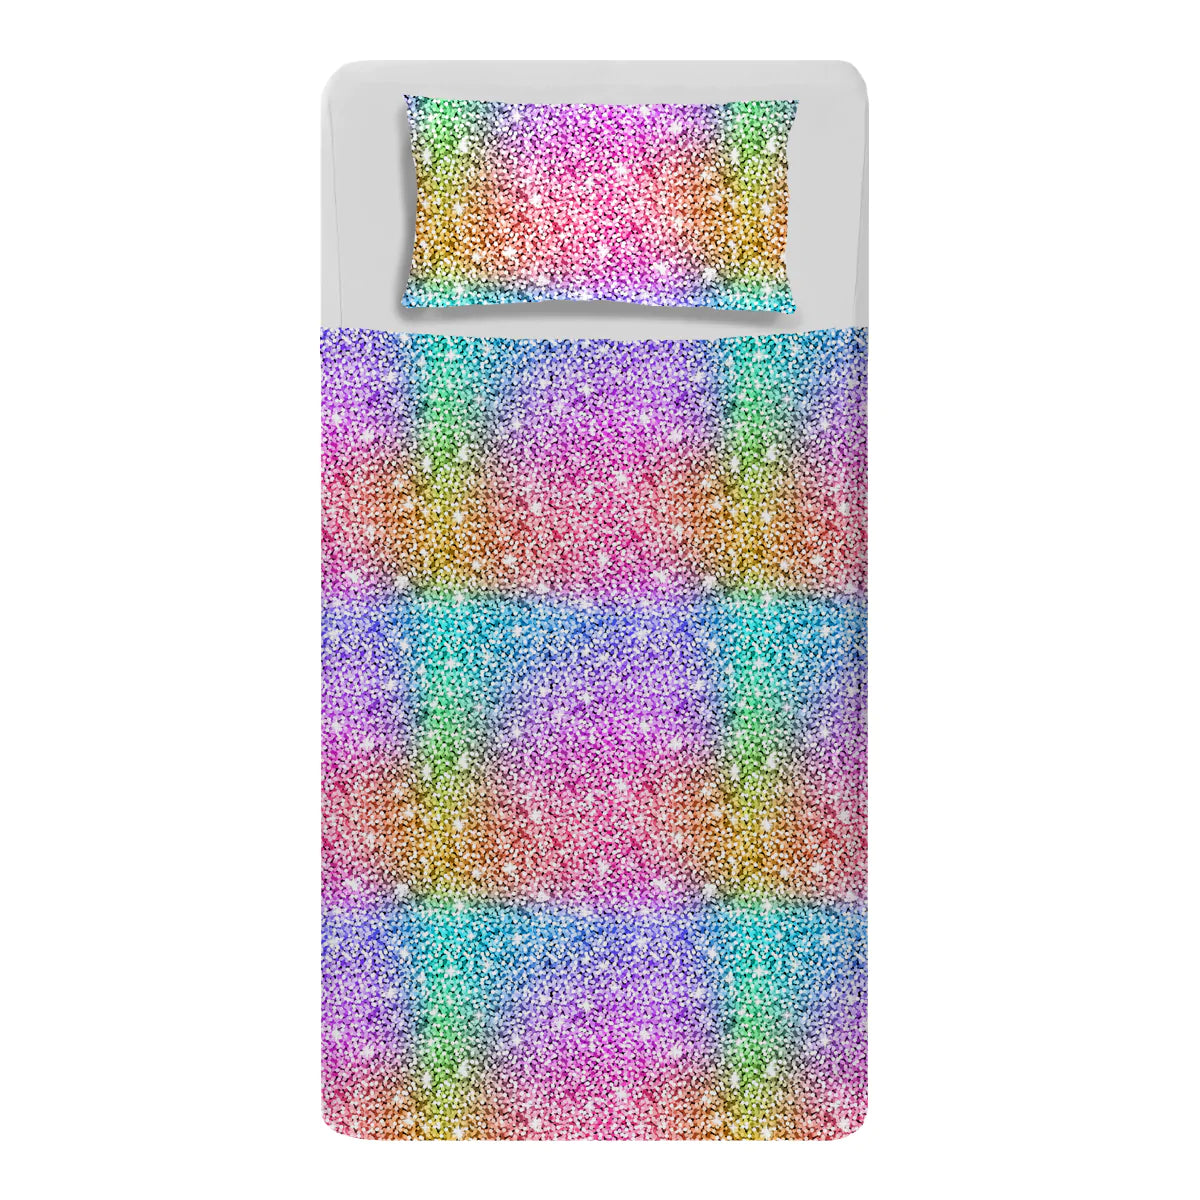 CALMCARE_Sparkles_Sensory_Compression_Bed_Sheet_and_pillow_case